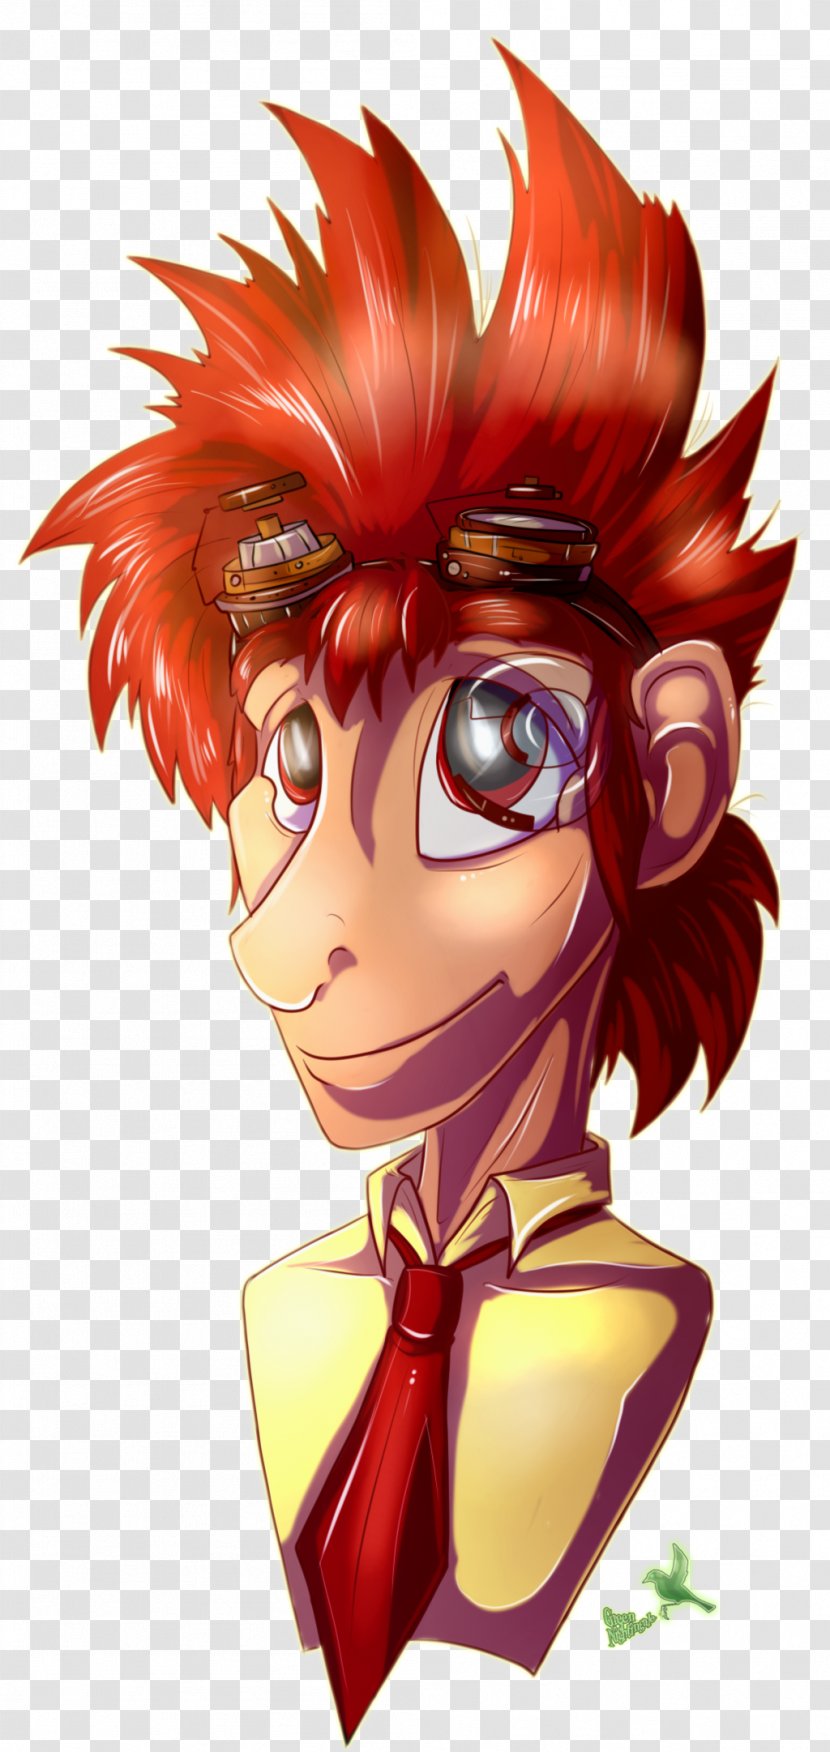 Red Hair Coloring Legendary Creature Cartoon - Rus' People Transparent PNG